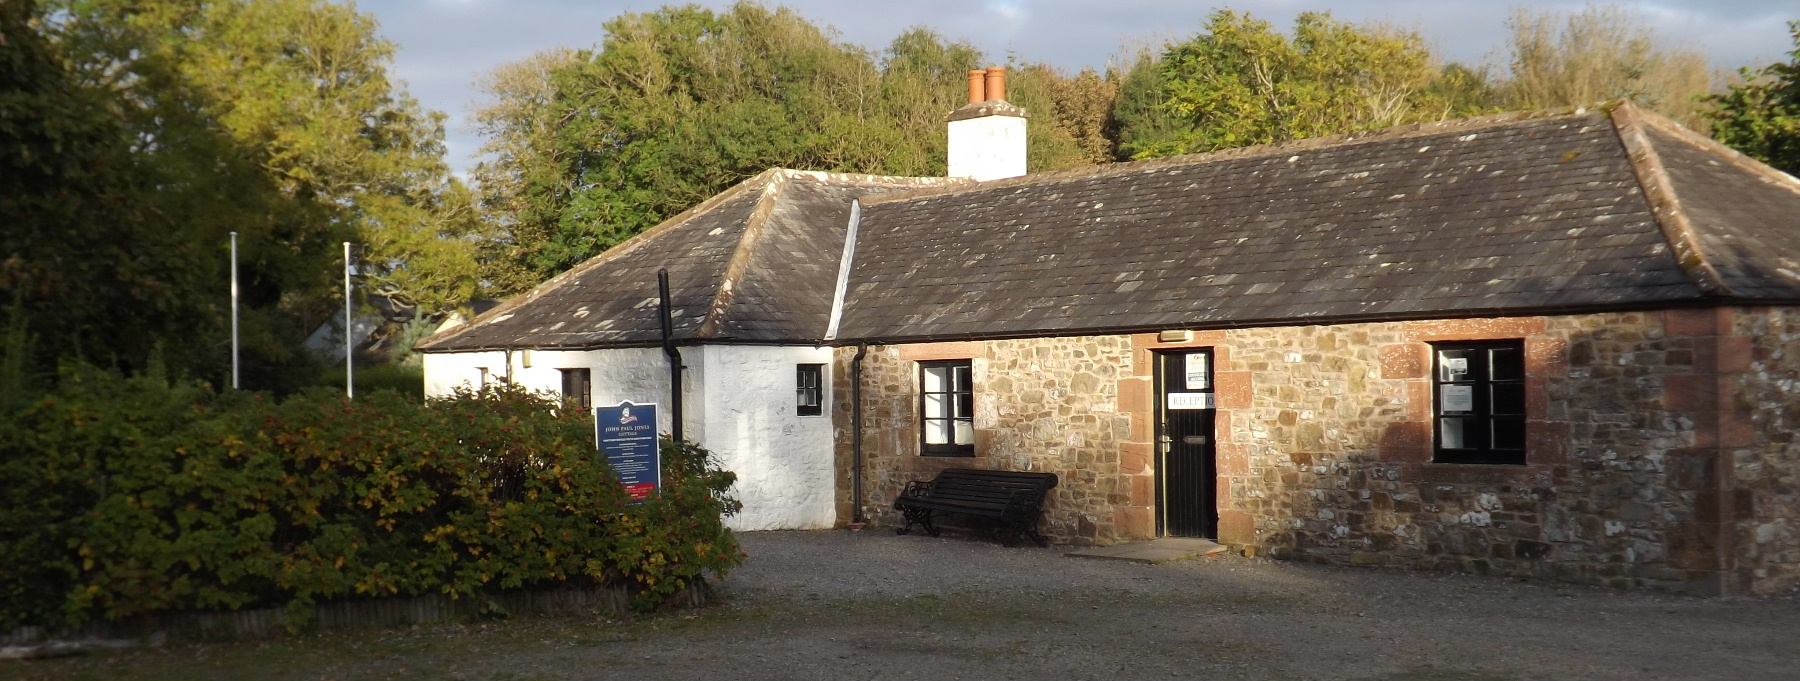 An external view of the cottage that was the birthplace of John Paul Jones and is now a museum charting his life